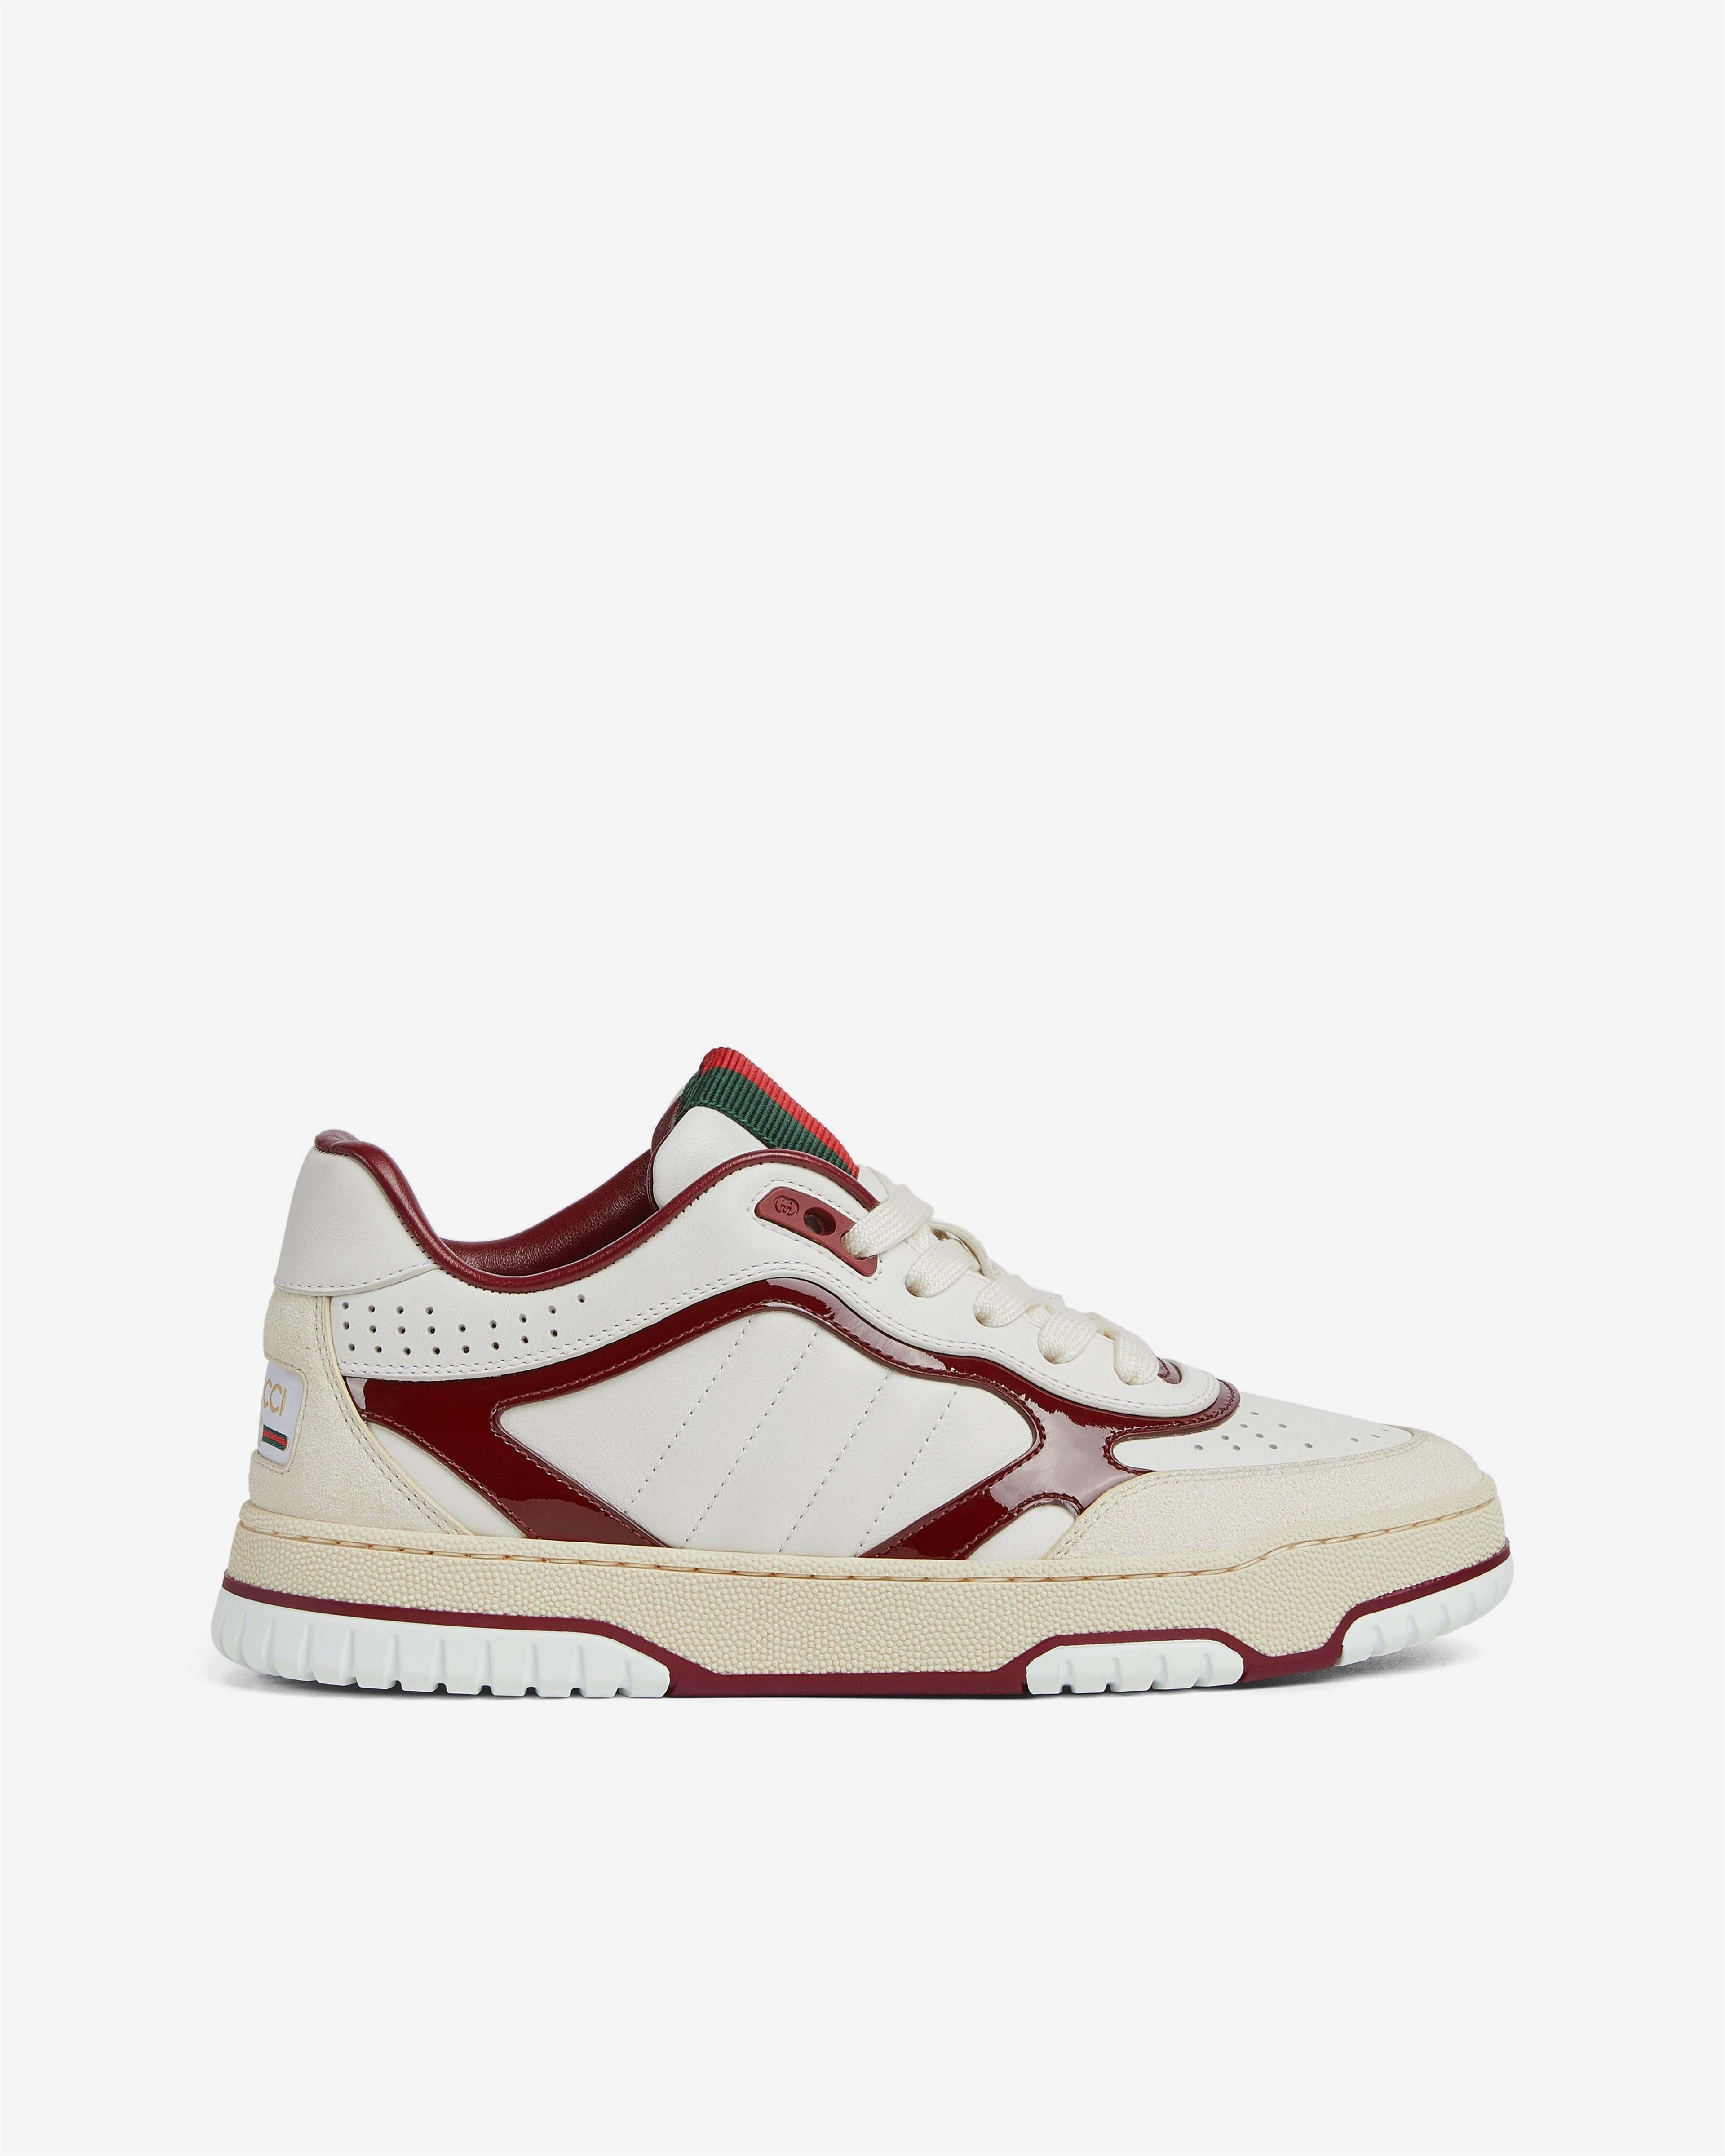 Gucci - Women's Re-web Trainer - (White/Red) by GUCCI